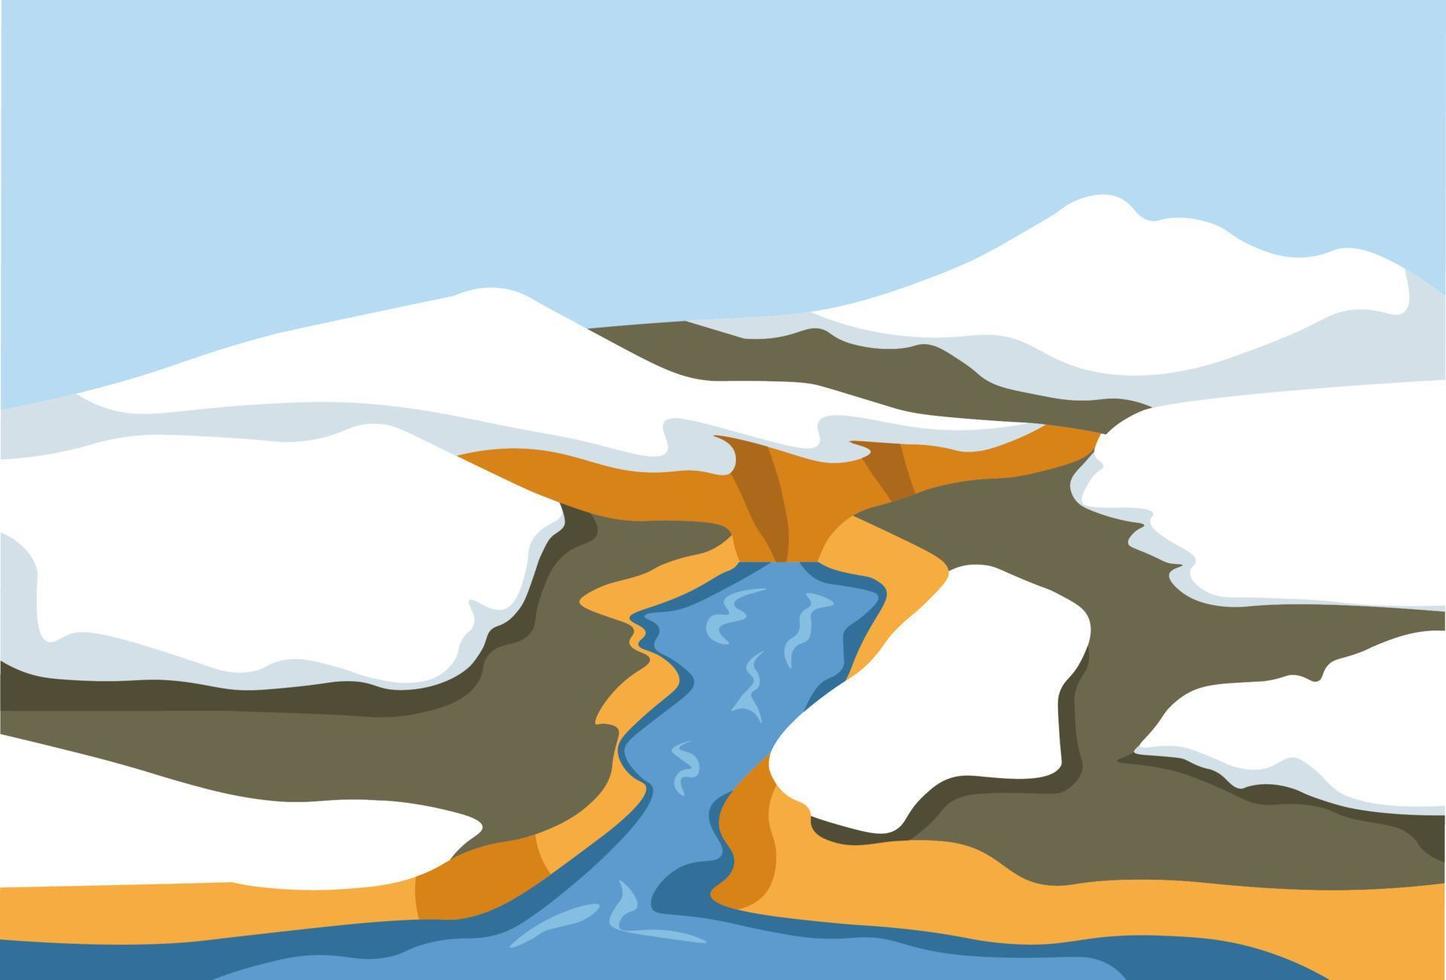 Spring season, melting snow and weather change vector